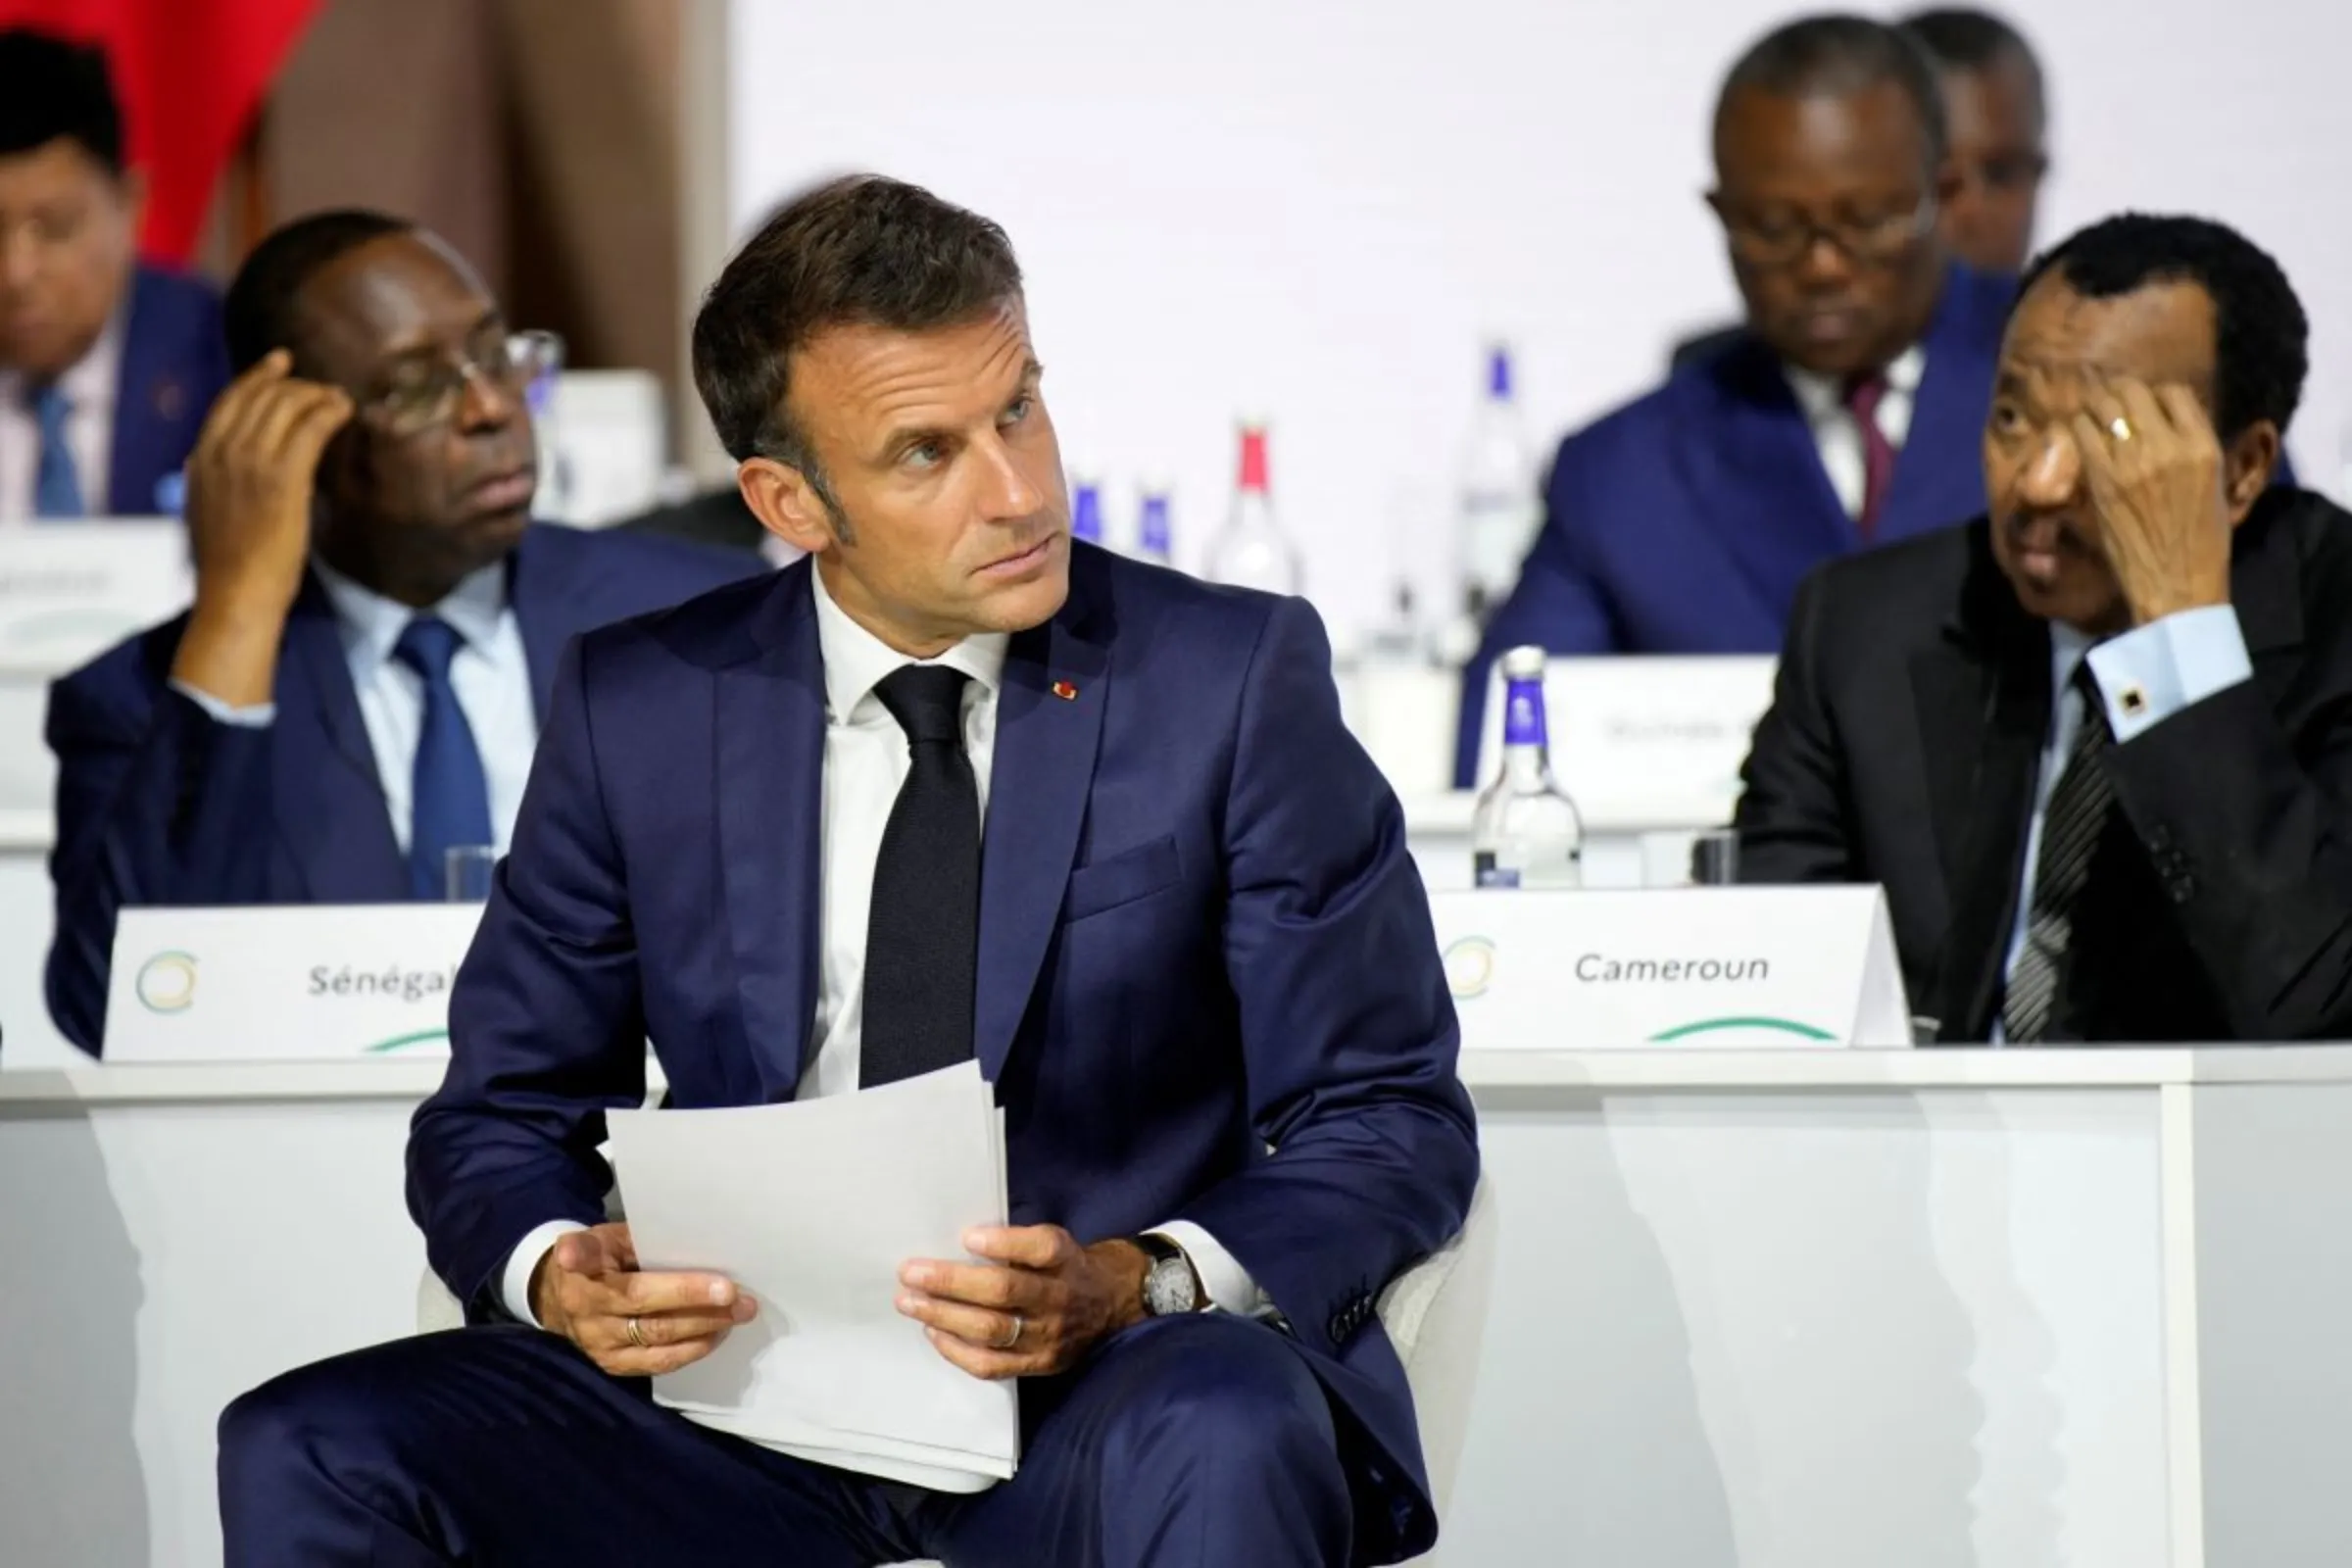 French President Emmanuel Macron listens during the closing session of the New Global Financial Pact Summit, Friday, June 23, 2023 in Paris, France. Lewis Joly/Pool via REUTERS